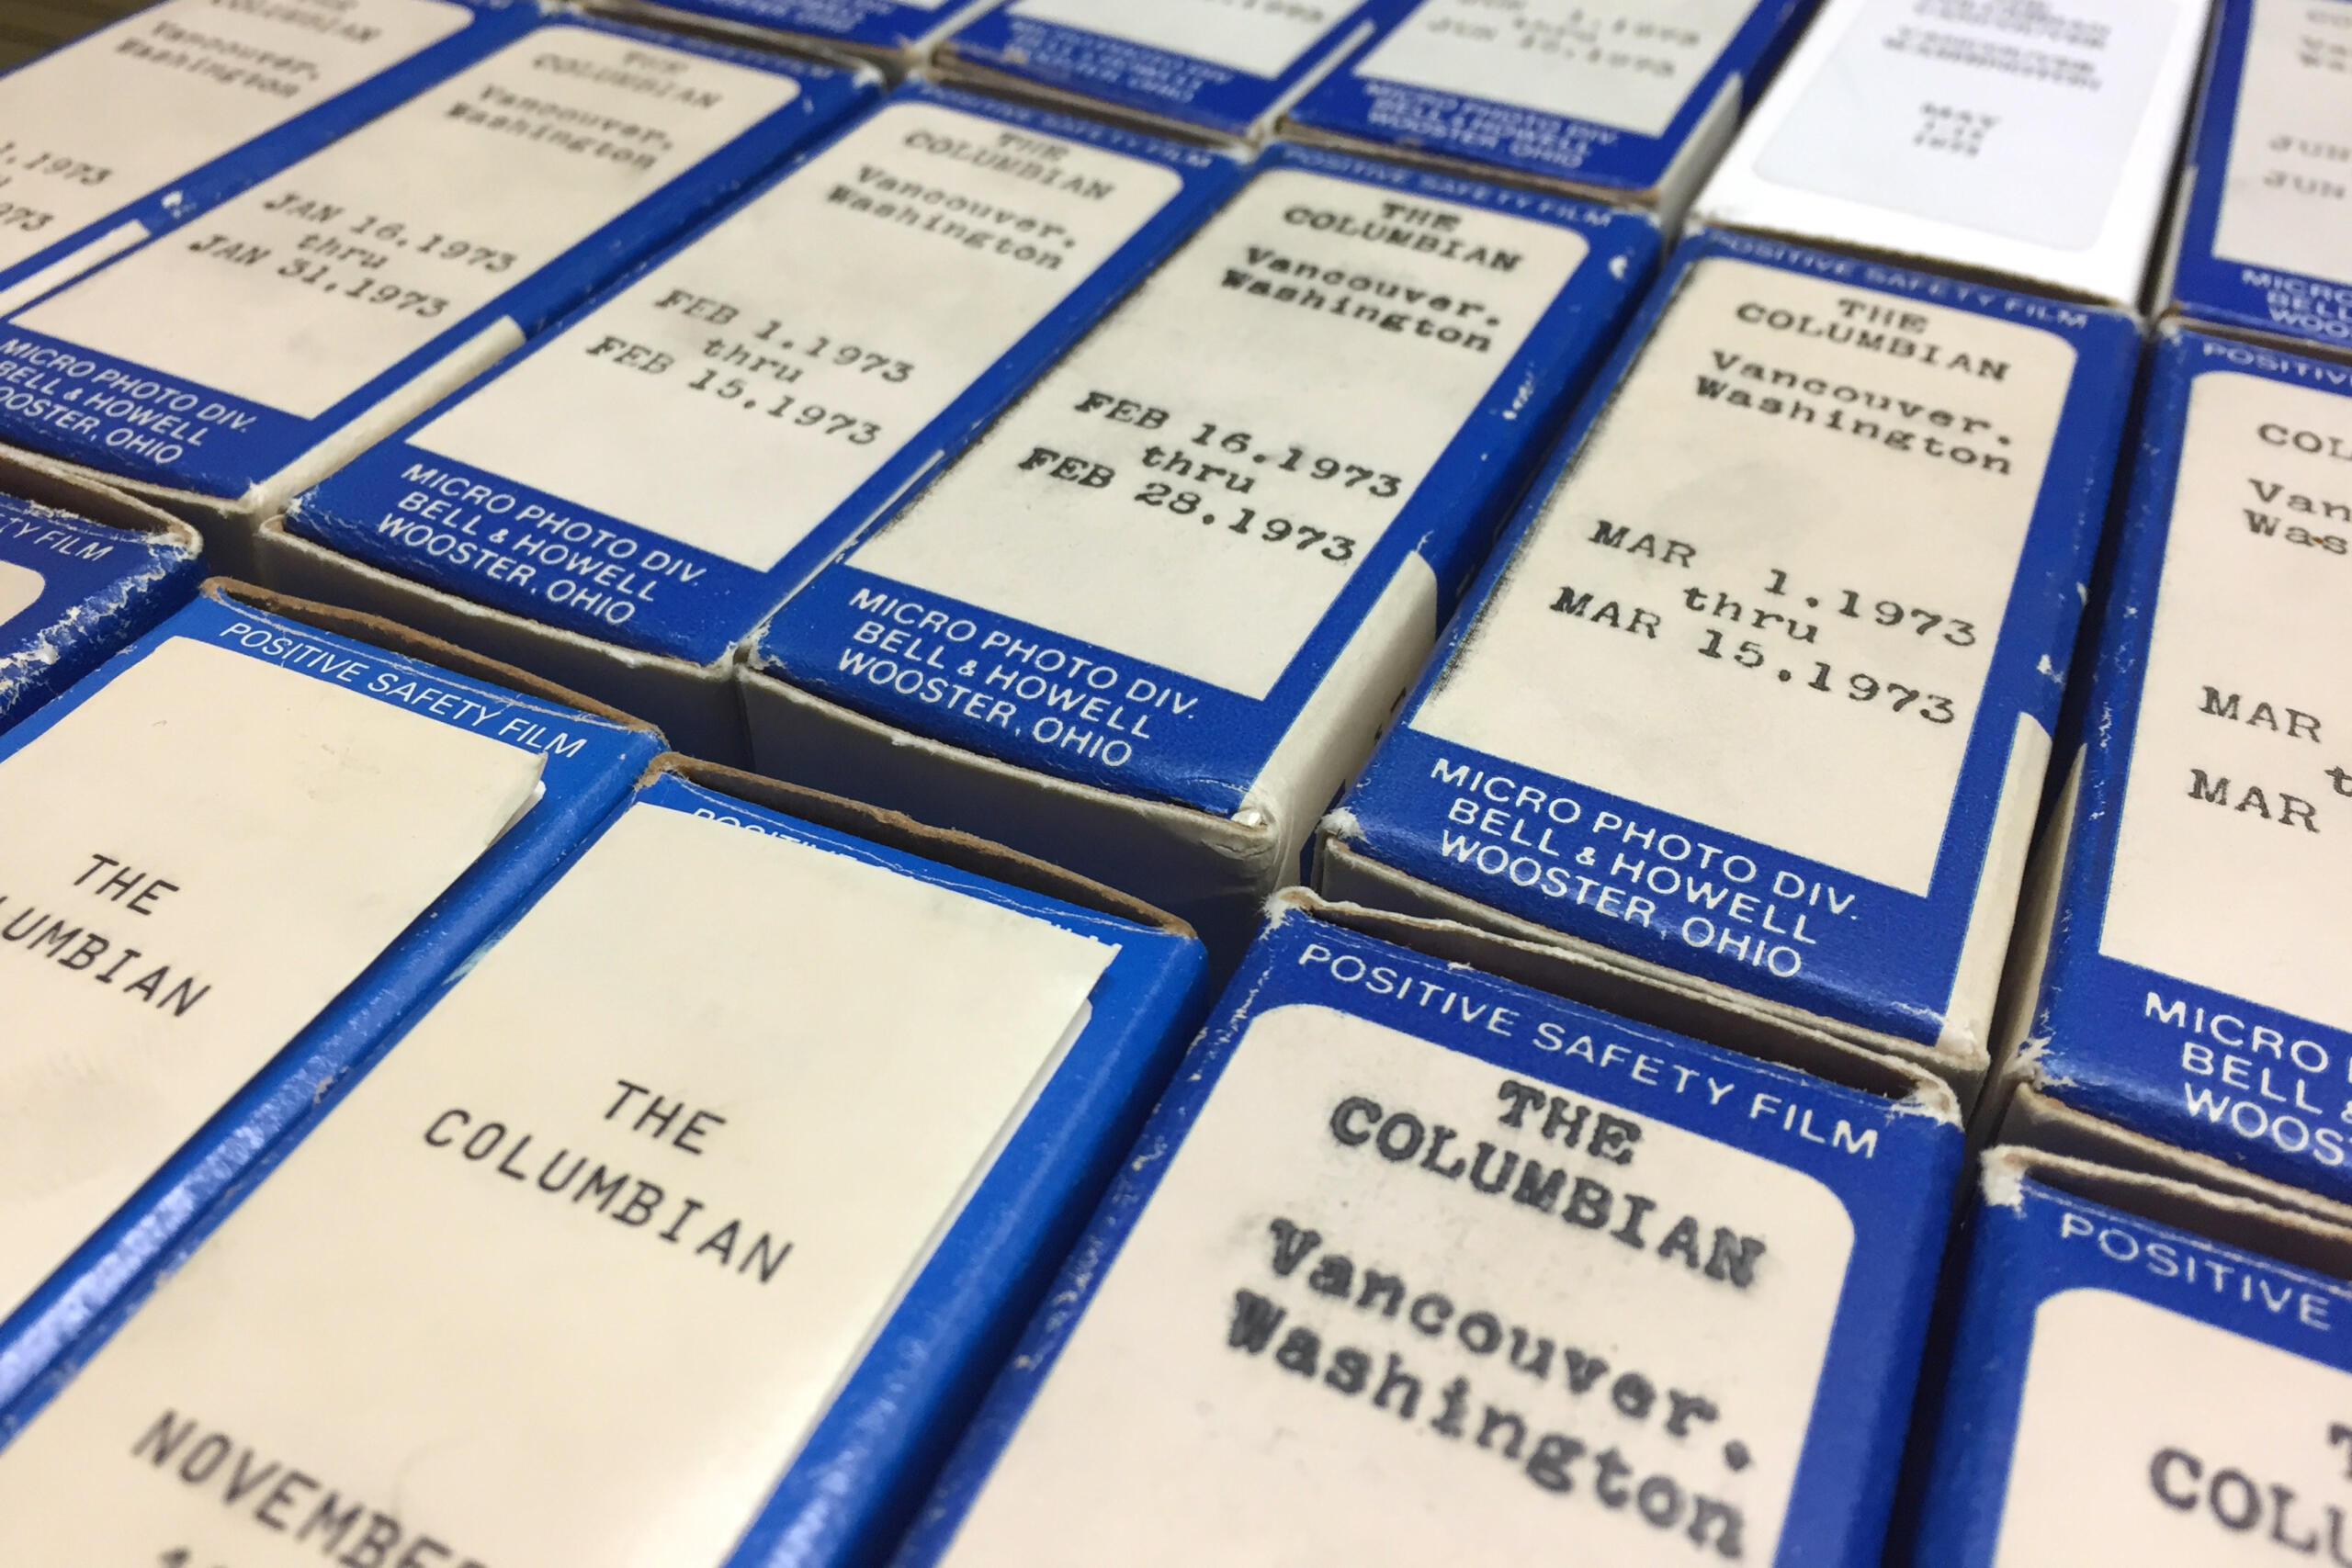 Decades of issues of The Columbian can be found on microfilm in the archives.